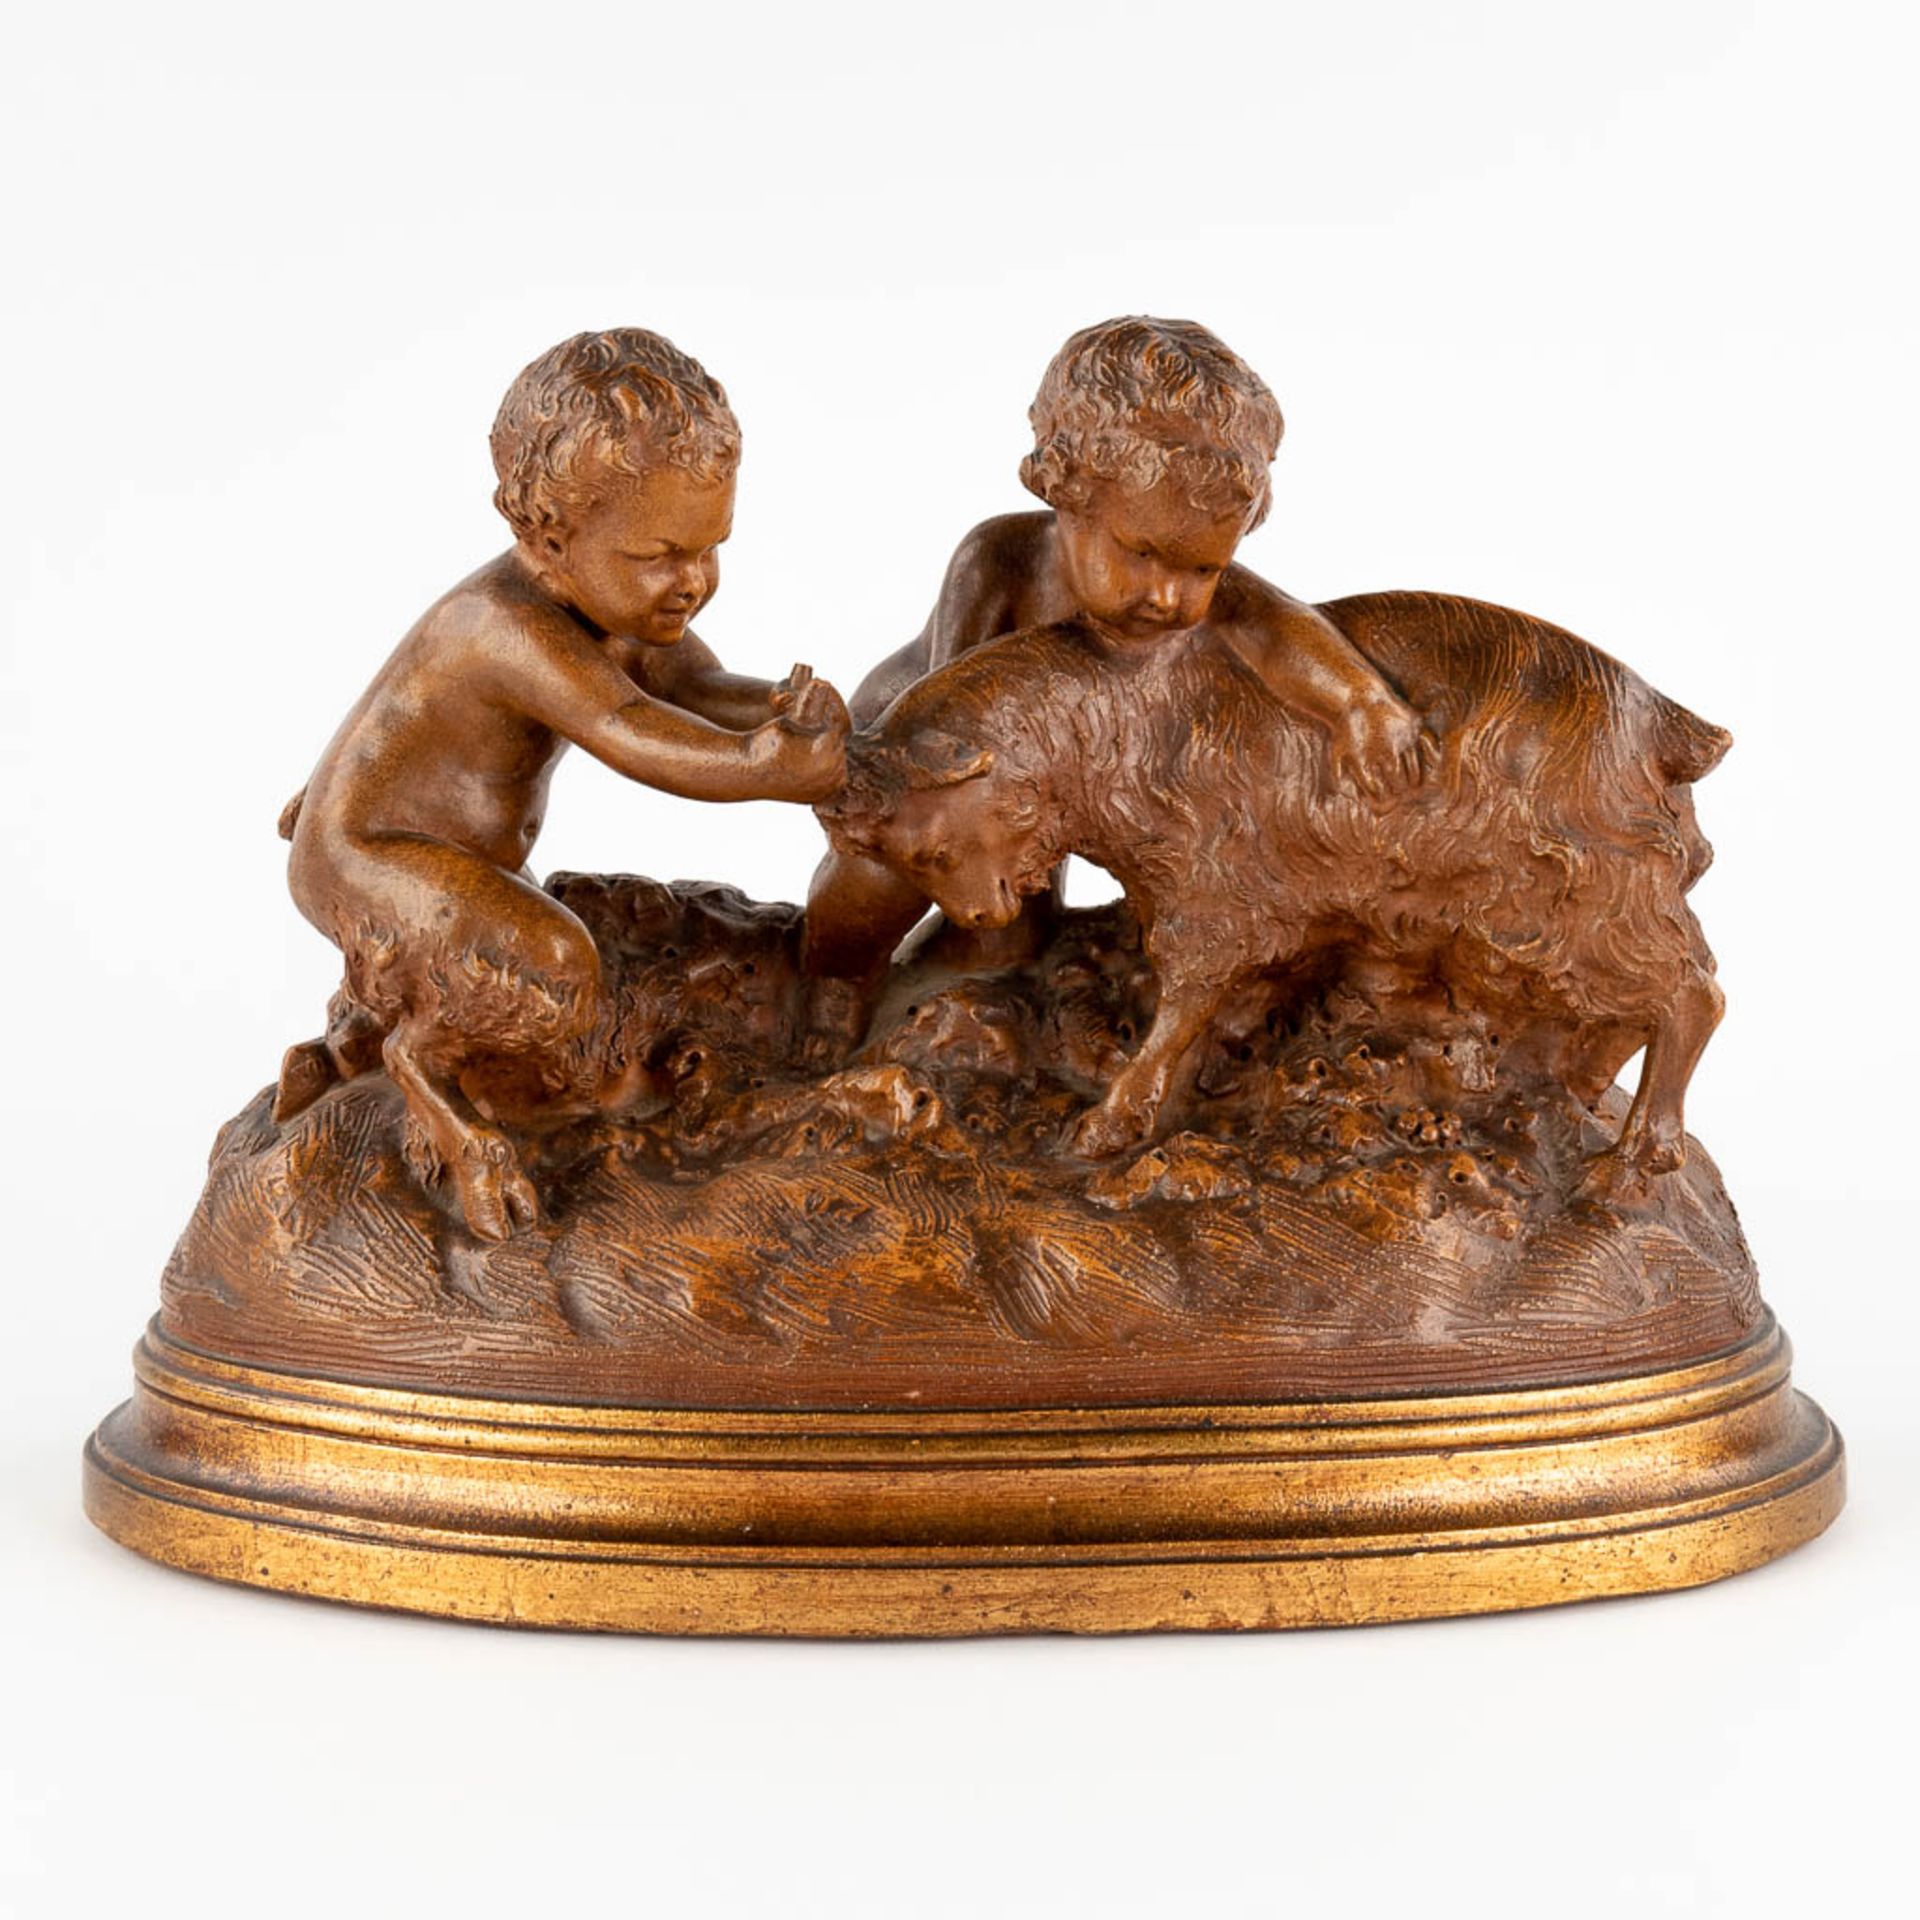 Giuseppe D'ASTE (1881-1945) 'Two satyrs with a goat' patinated terracotta. (L:22 x W:40 x H:28 cm)